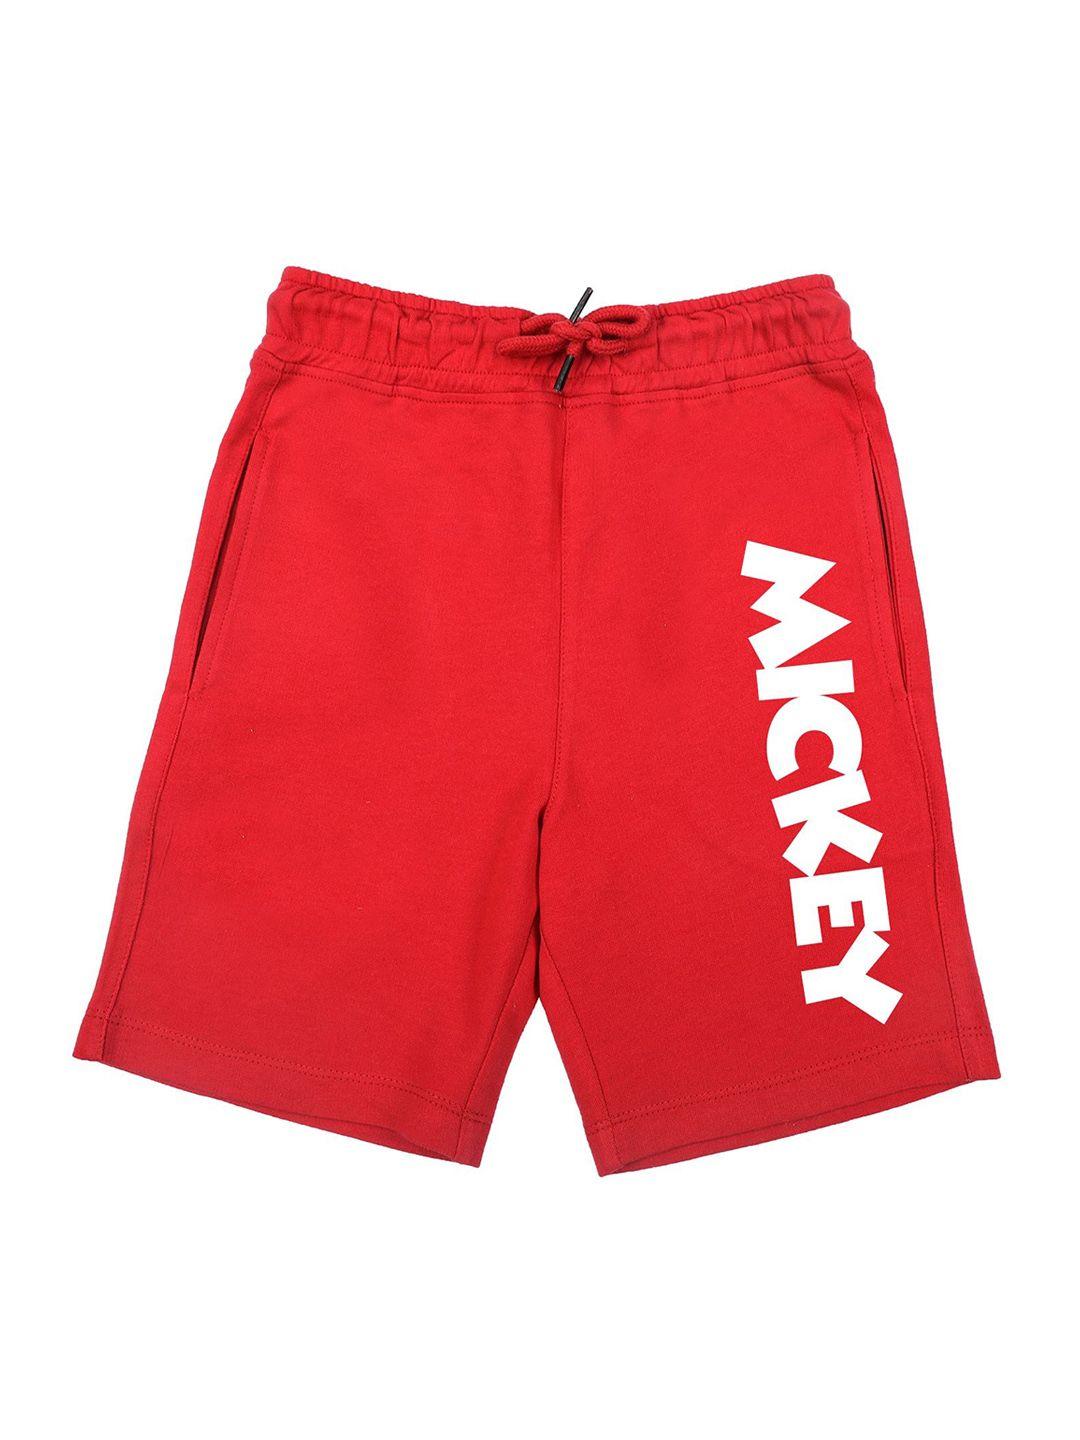 disney by wear your mind boys red & white printed shorts